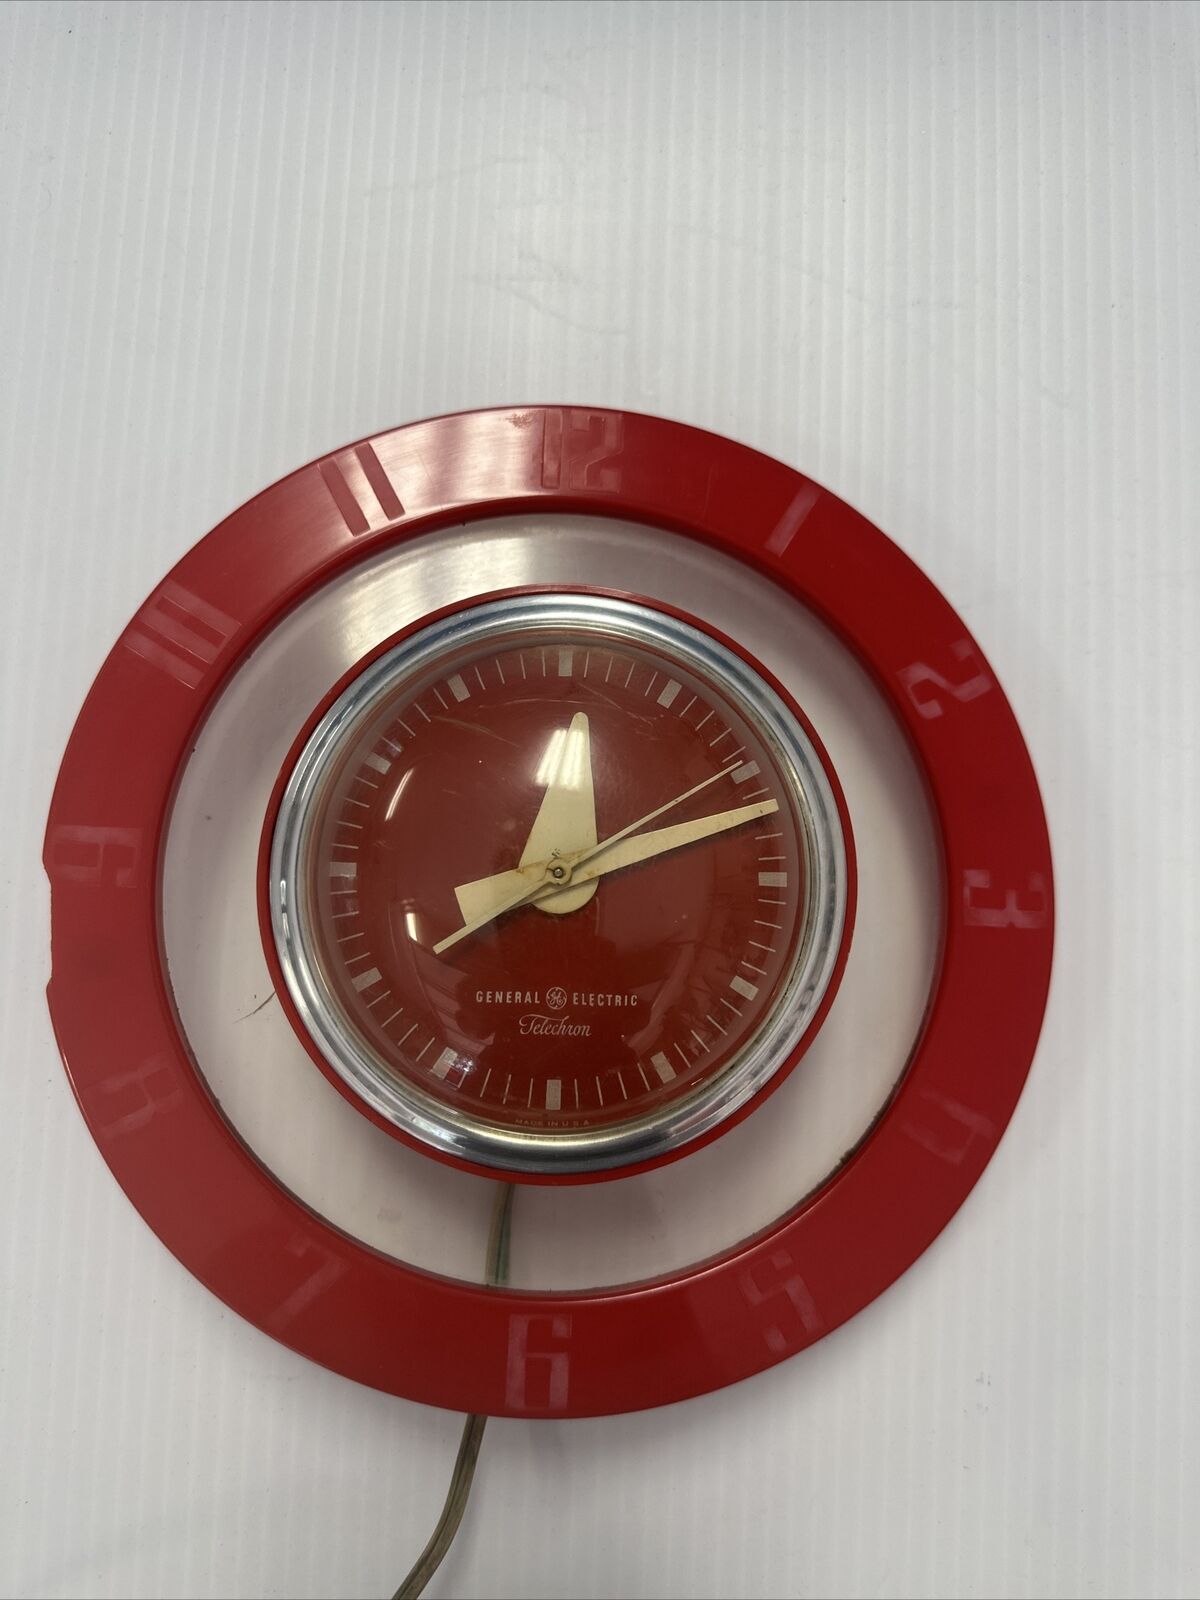 Vintage General Electric Telechron Space Age Red Wall Clock. Flying Saucer Look.